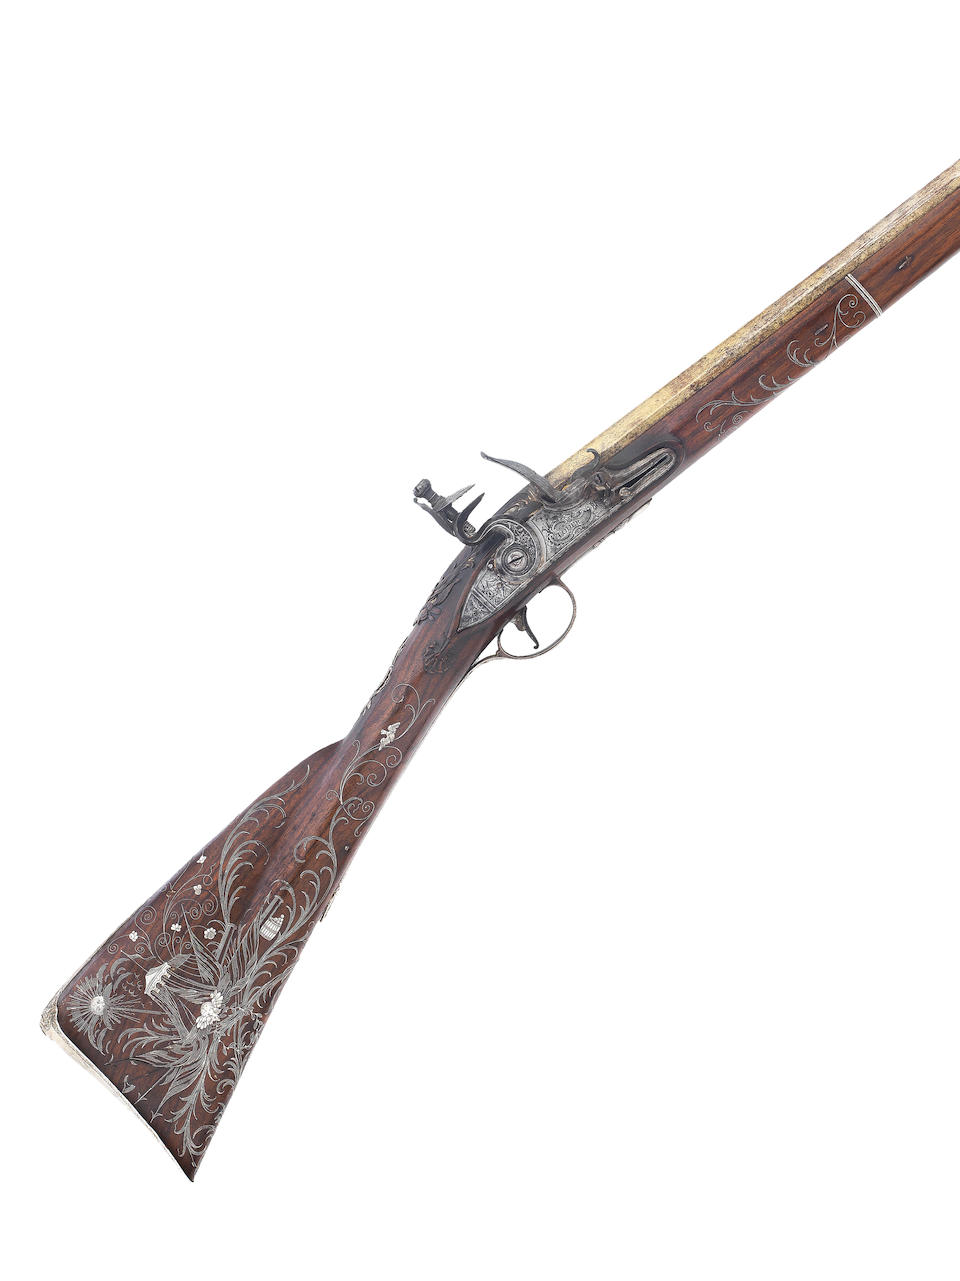 A Very Fine 14-Bore Flintlock Silver-Mounted Sporting Gun, The Gift Of Lieut. Colonel George Campbell To Henry Robertson Esq. As A Token Of Friendship